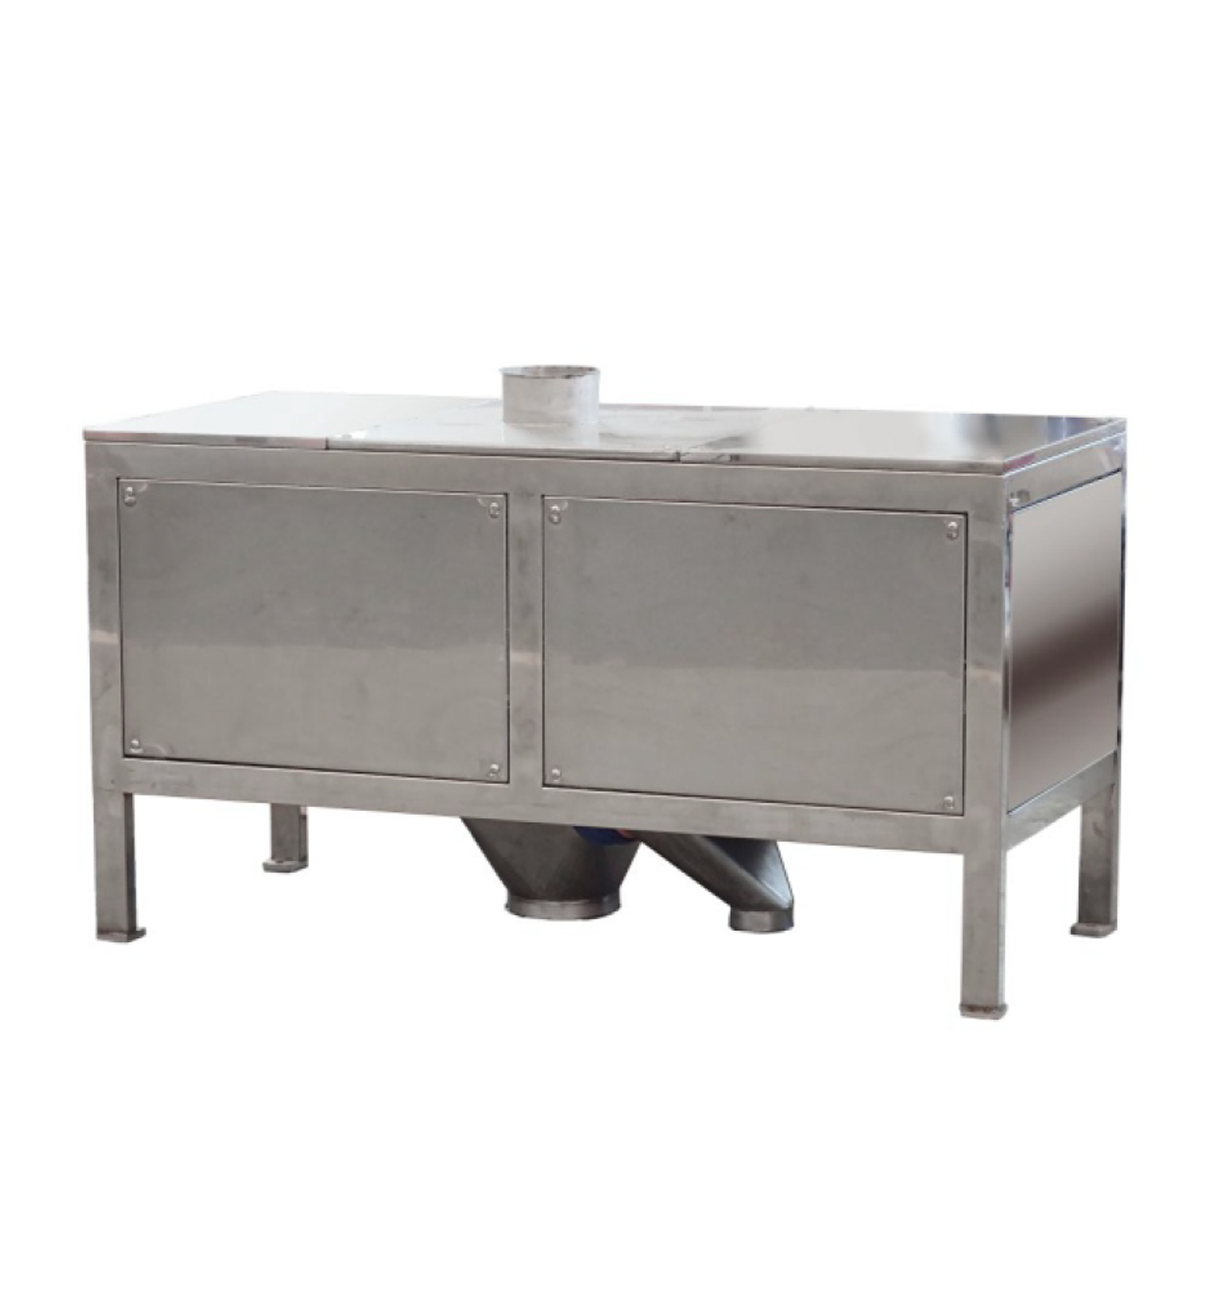 Permanent Magnetic Bar Iron Removal Box Series